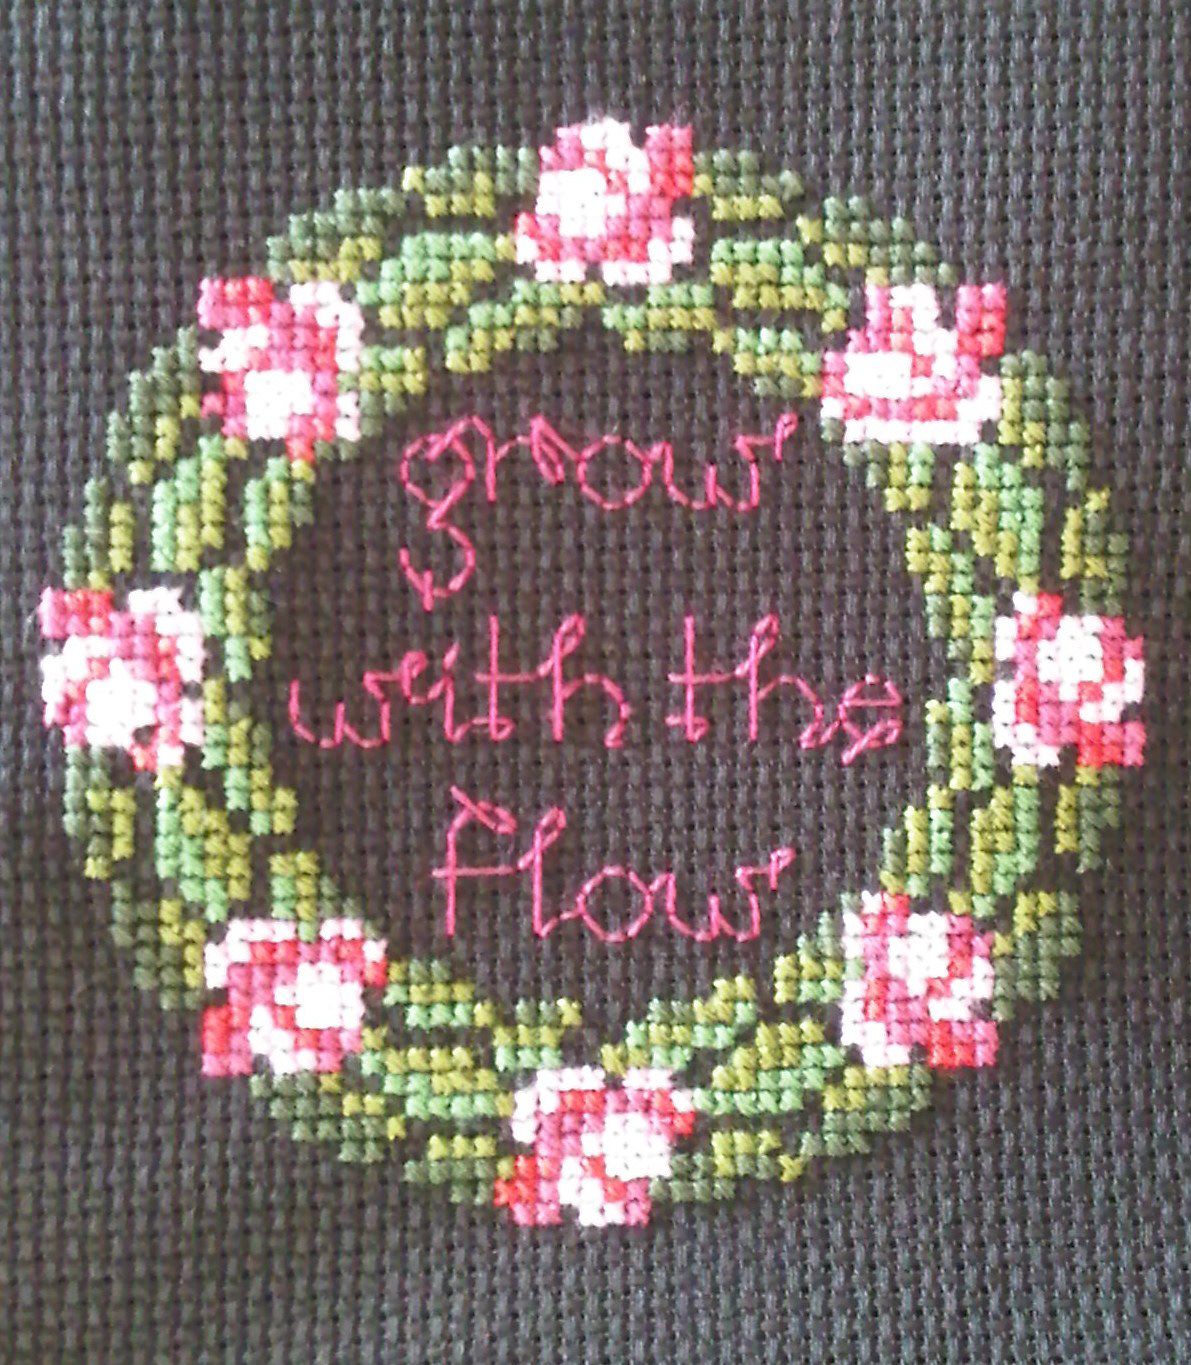 Flowers Embroidery sewing cross stitch timothy leary quote Love joy grow flow